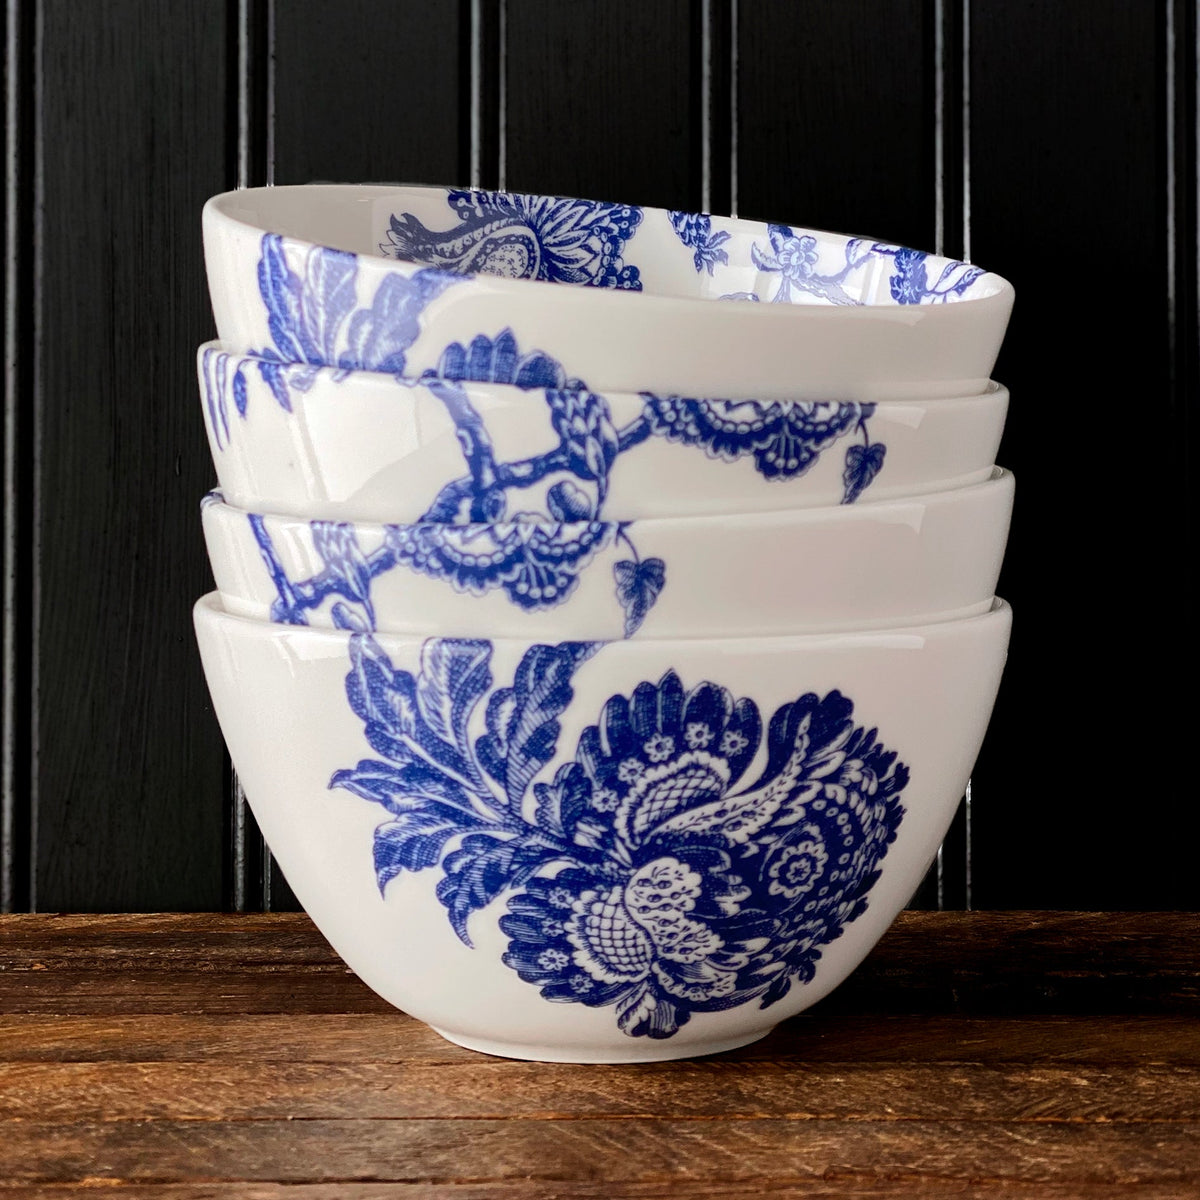 A stack of four white Arcadia Cereal Bowls by Caskata with blue floral patterns, part of the elegant Arcadia porcelain dinnerware collection, placed on a wooden surface against a black paneled background.